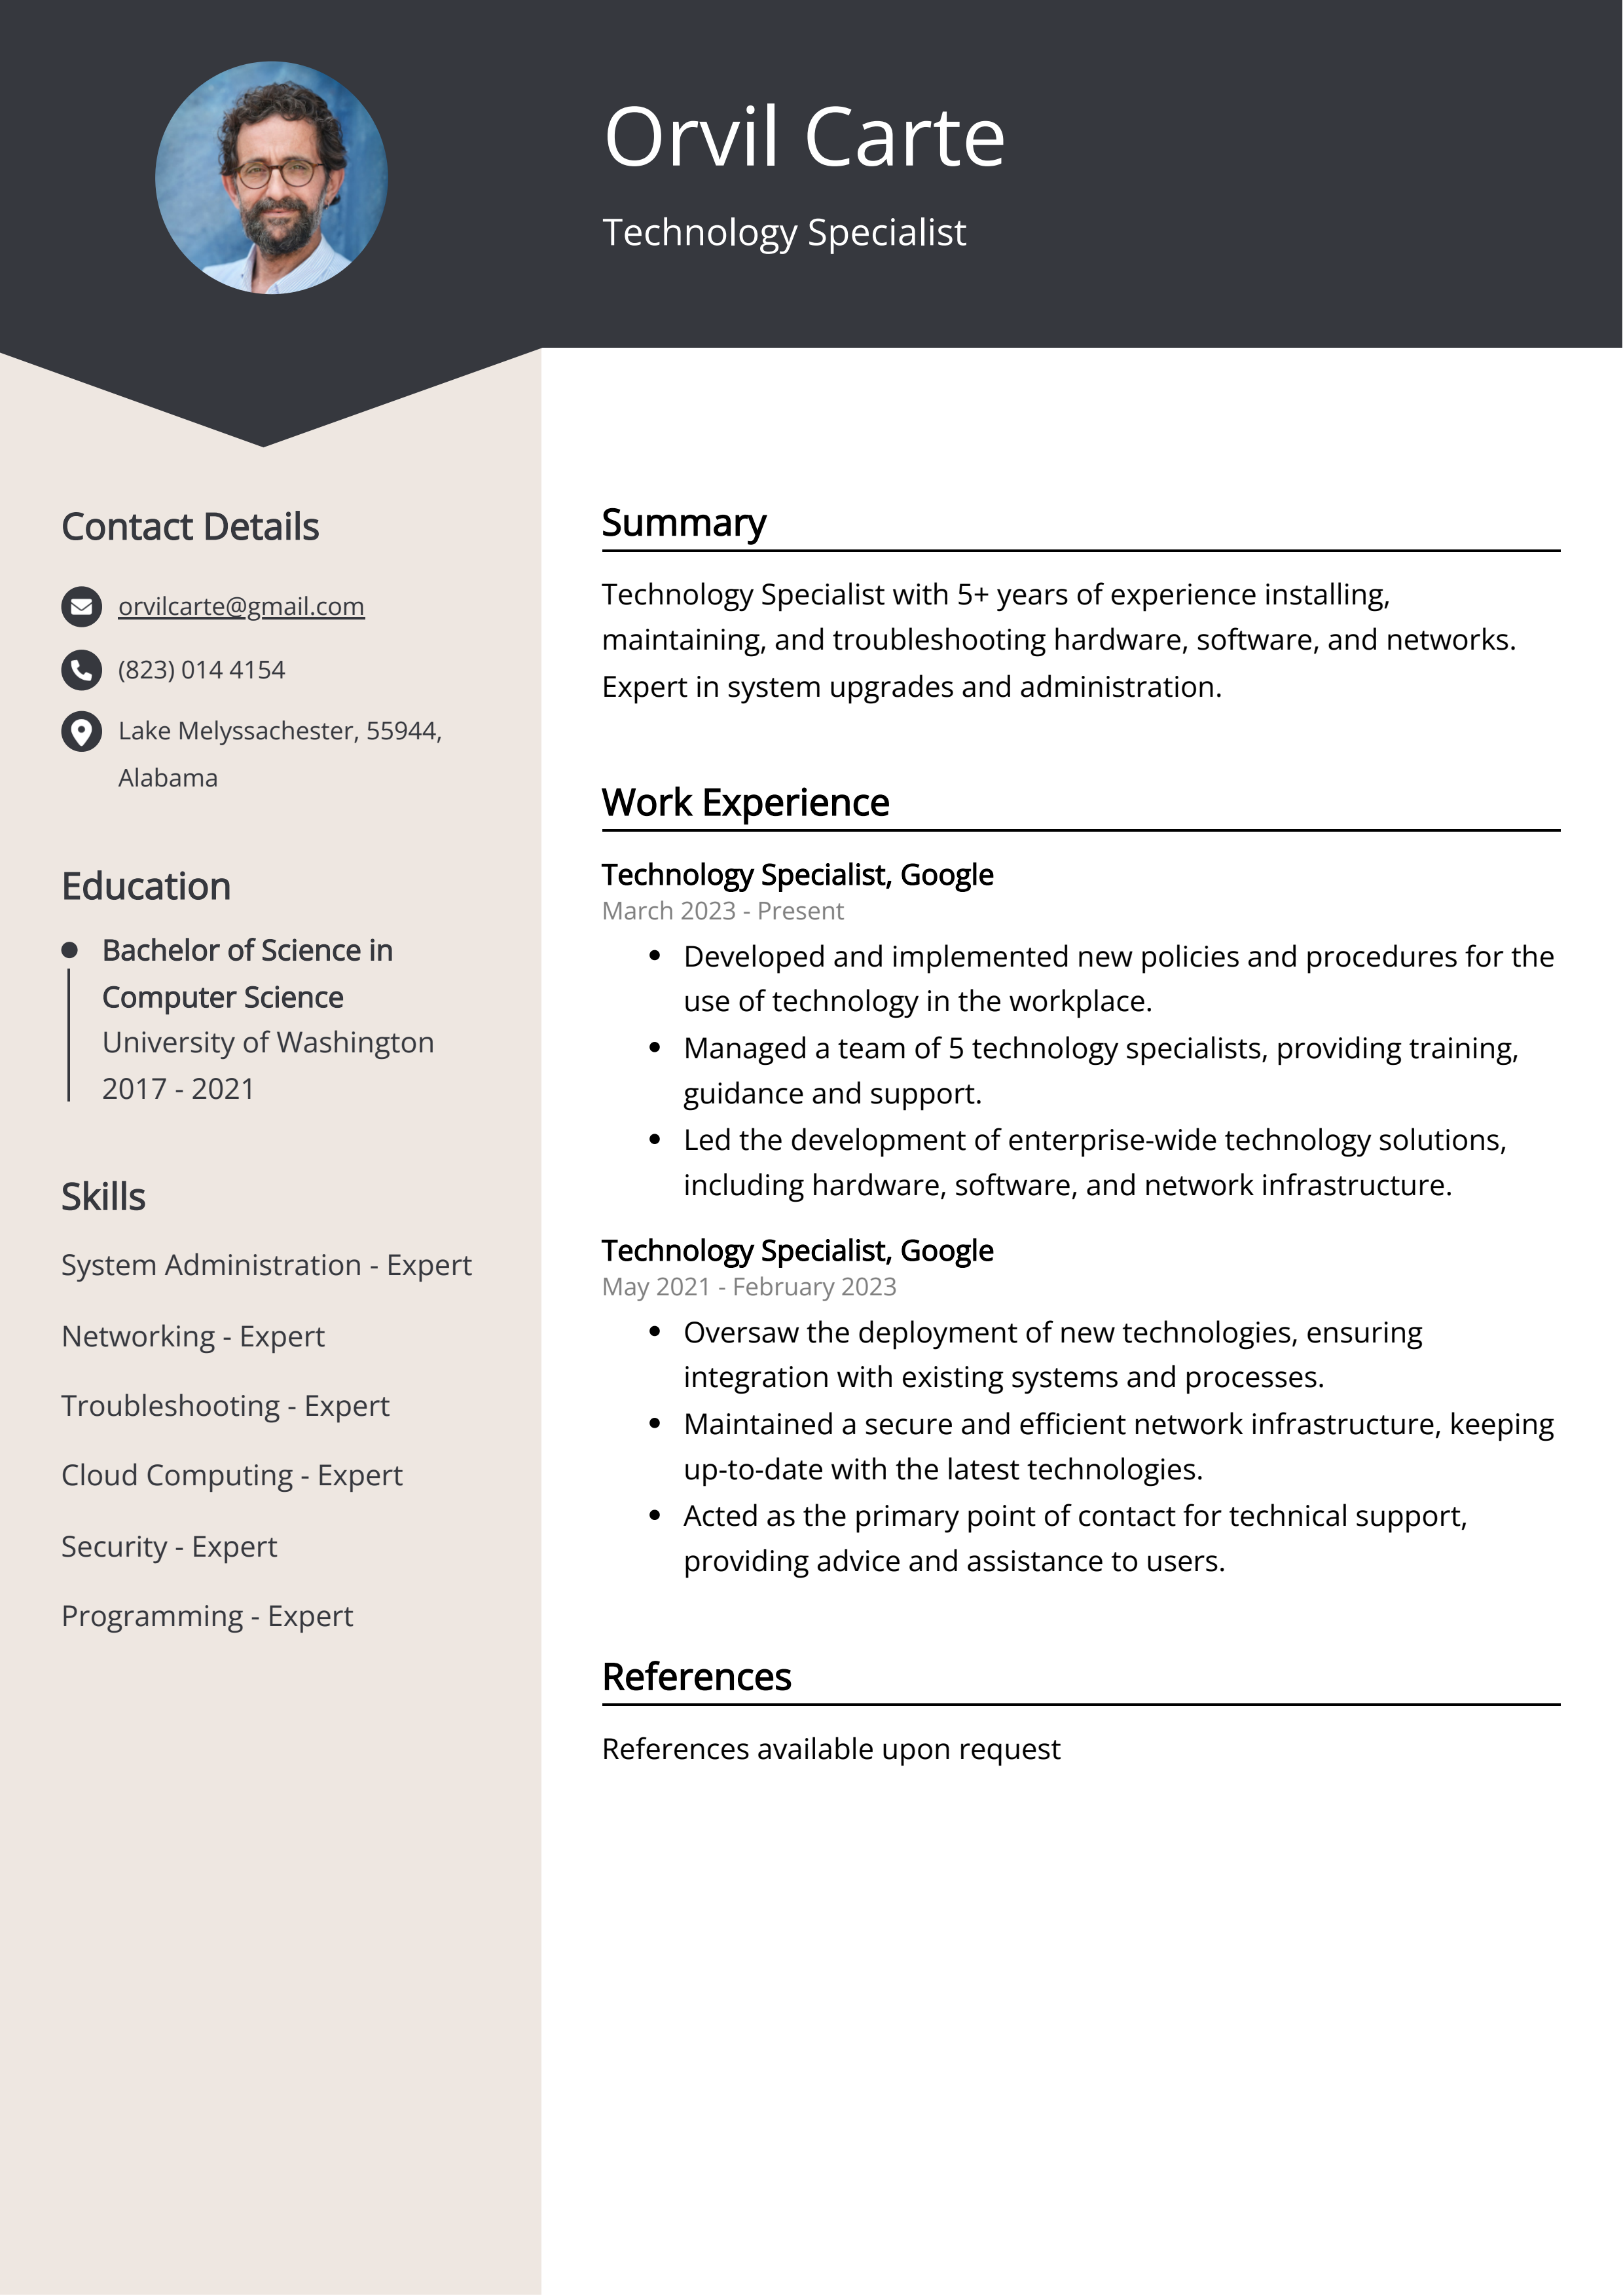 Technology Specialist CV Example